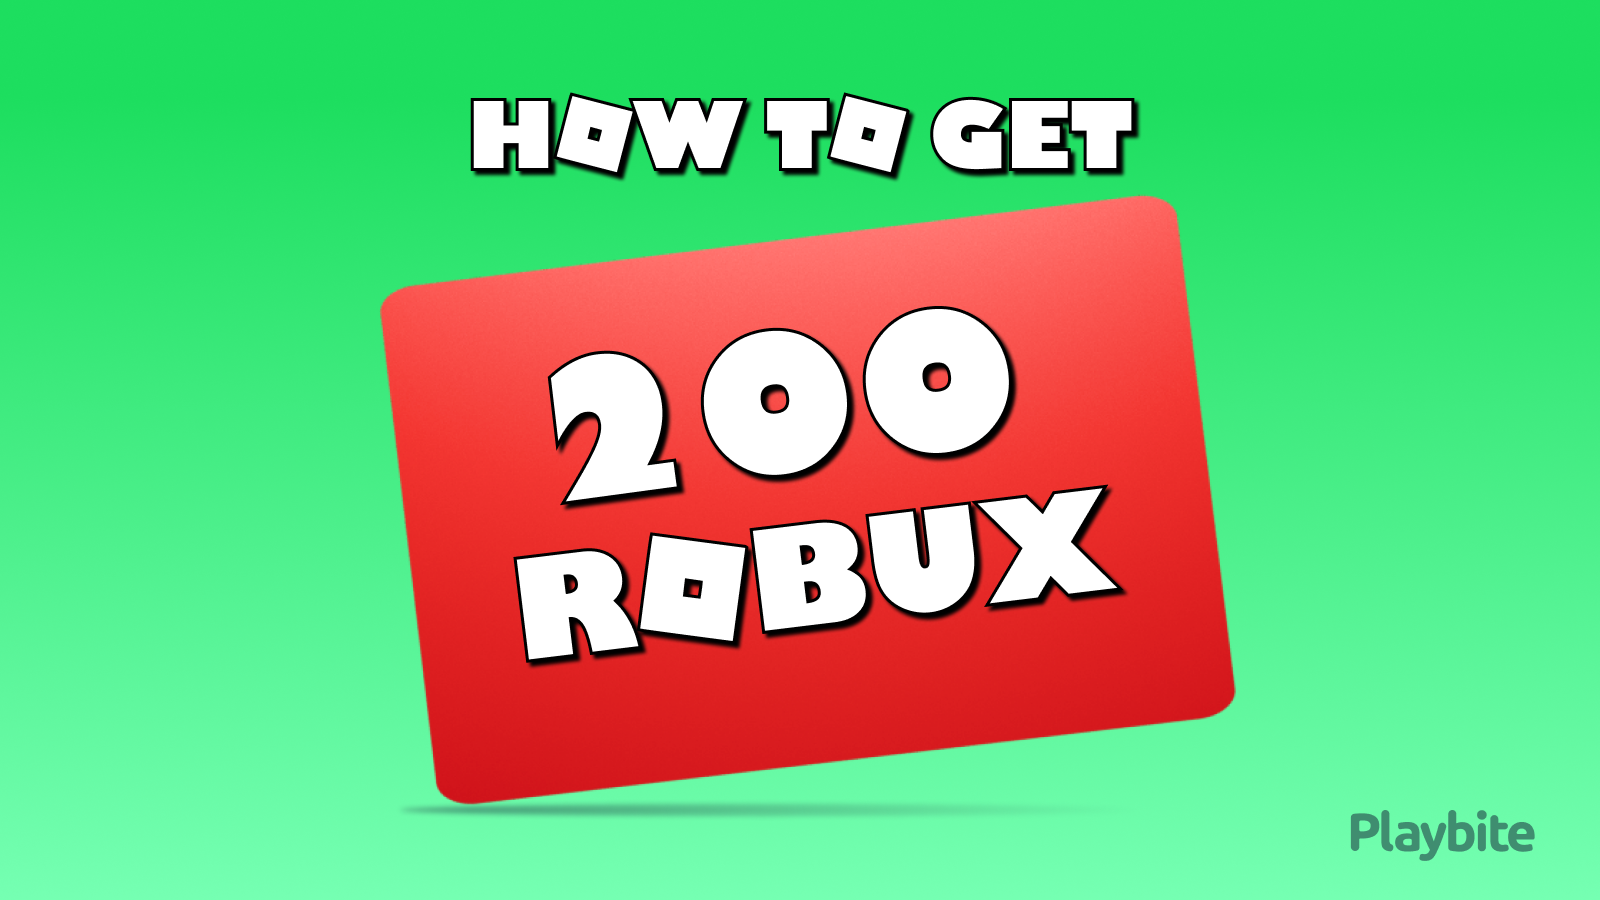 How To Get 200 Robux For Free - Playbite